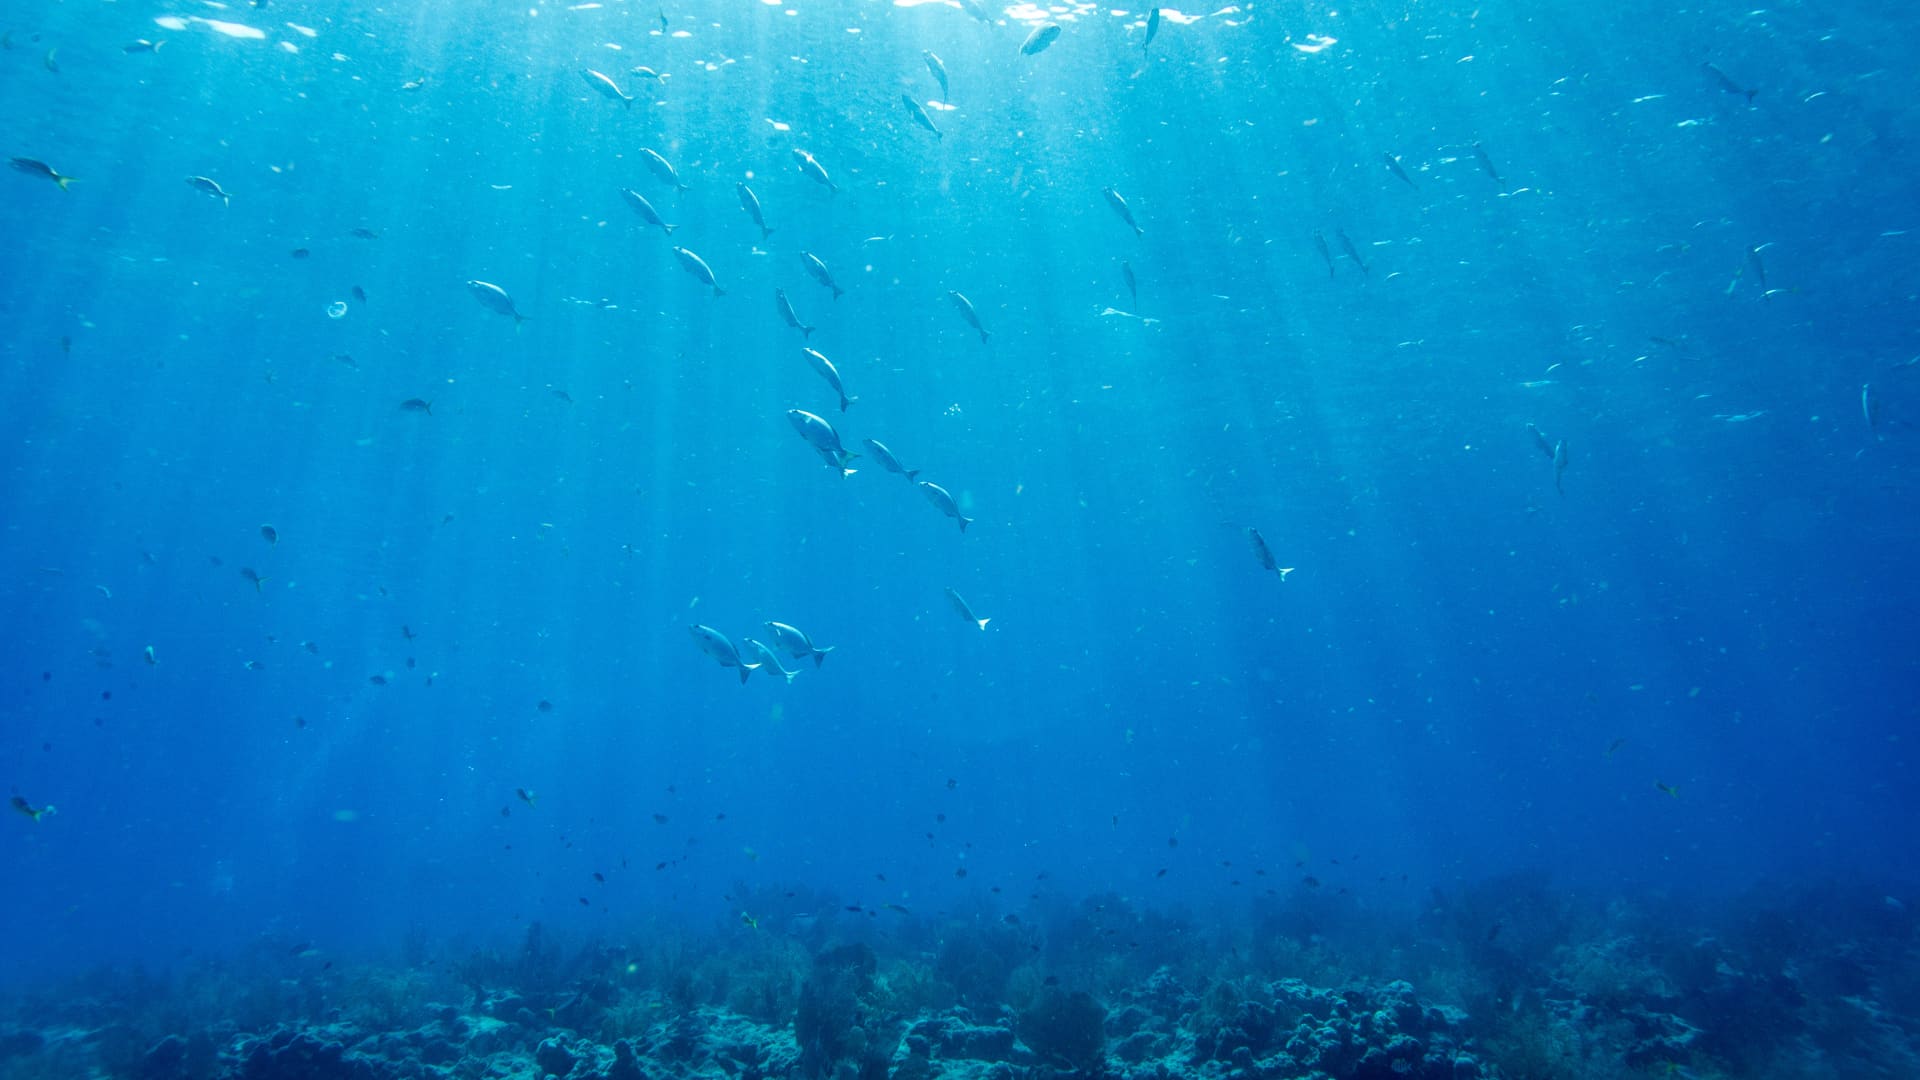 This startup is helping the ocean absorb more harmful carbon emissions